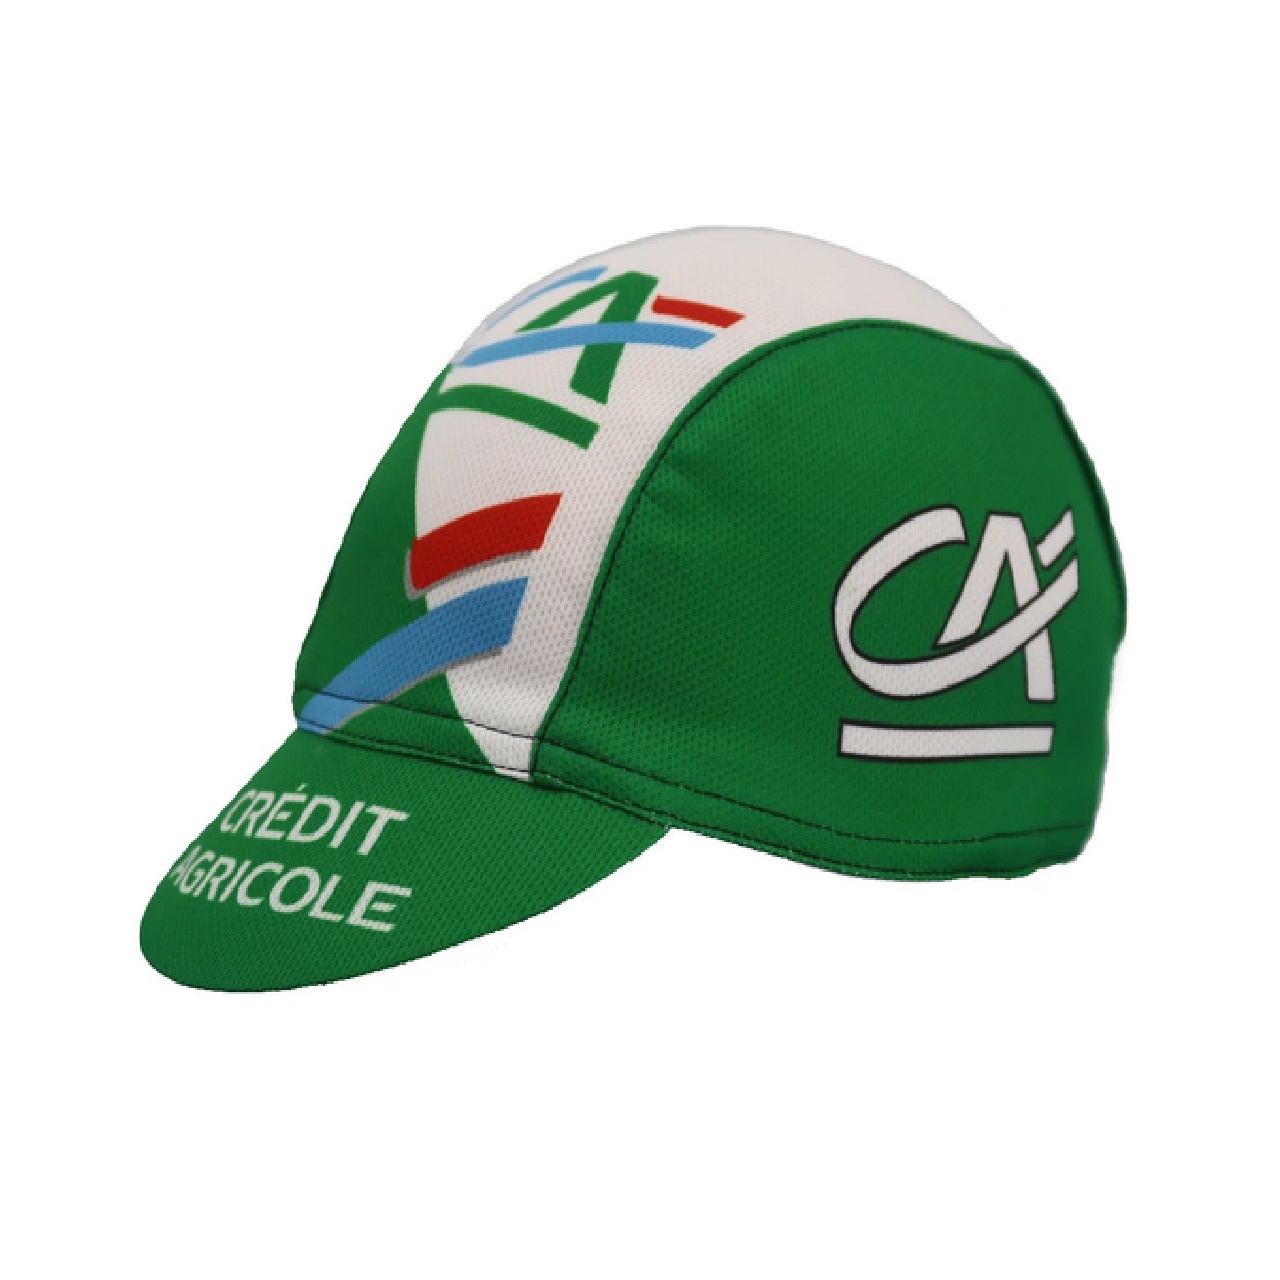 Team Credit Agricole Summer cycling Cap Green/white